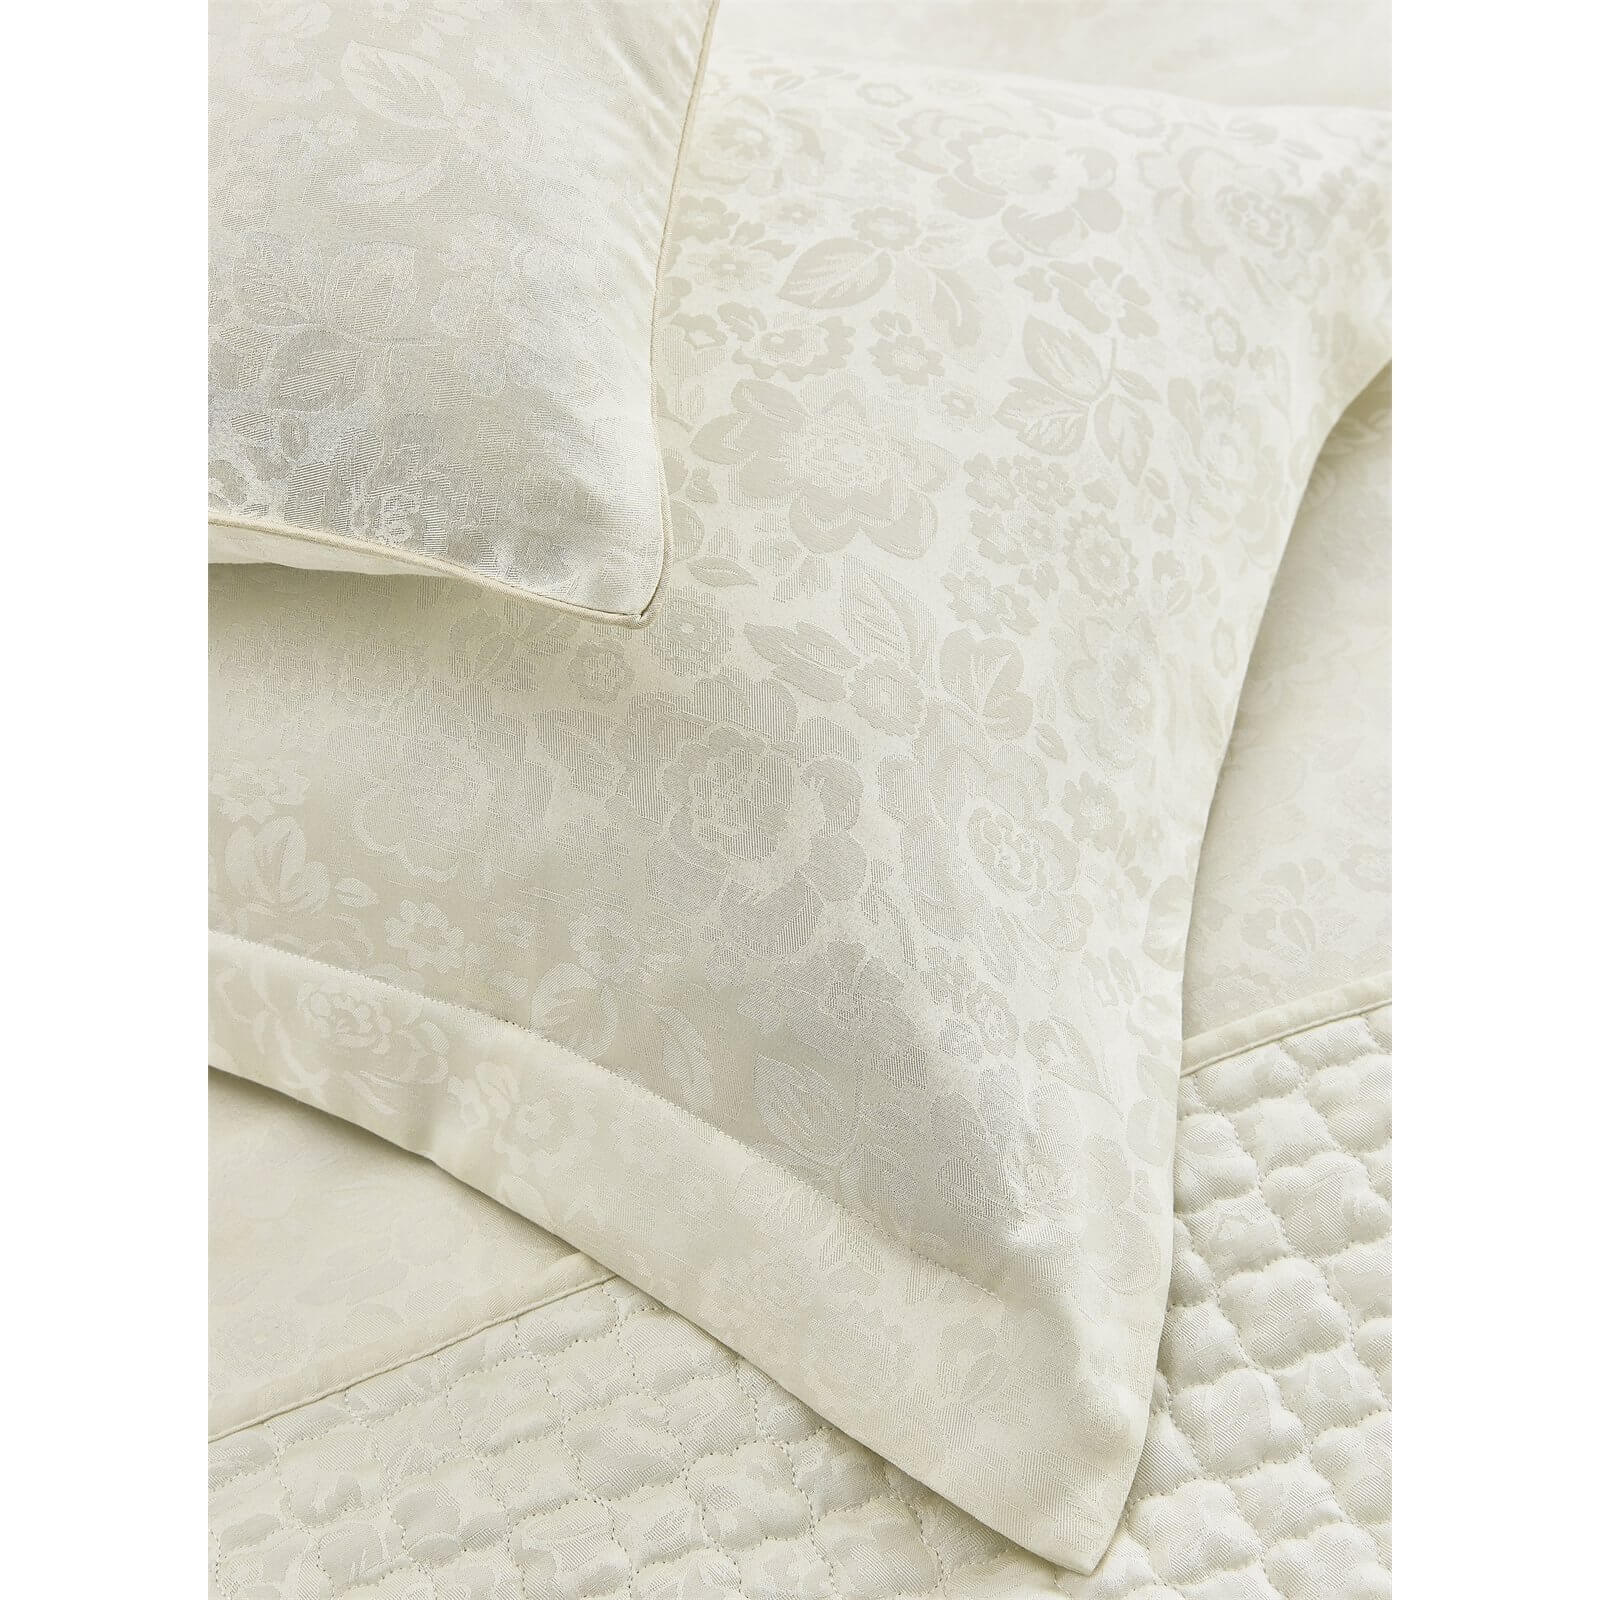 Helena Springfield Cassie Duvet Cover - Double